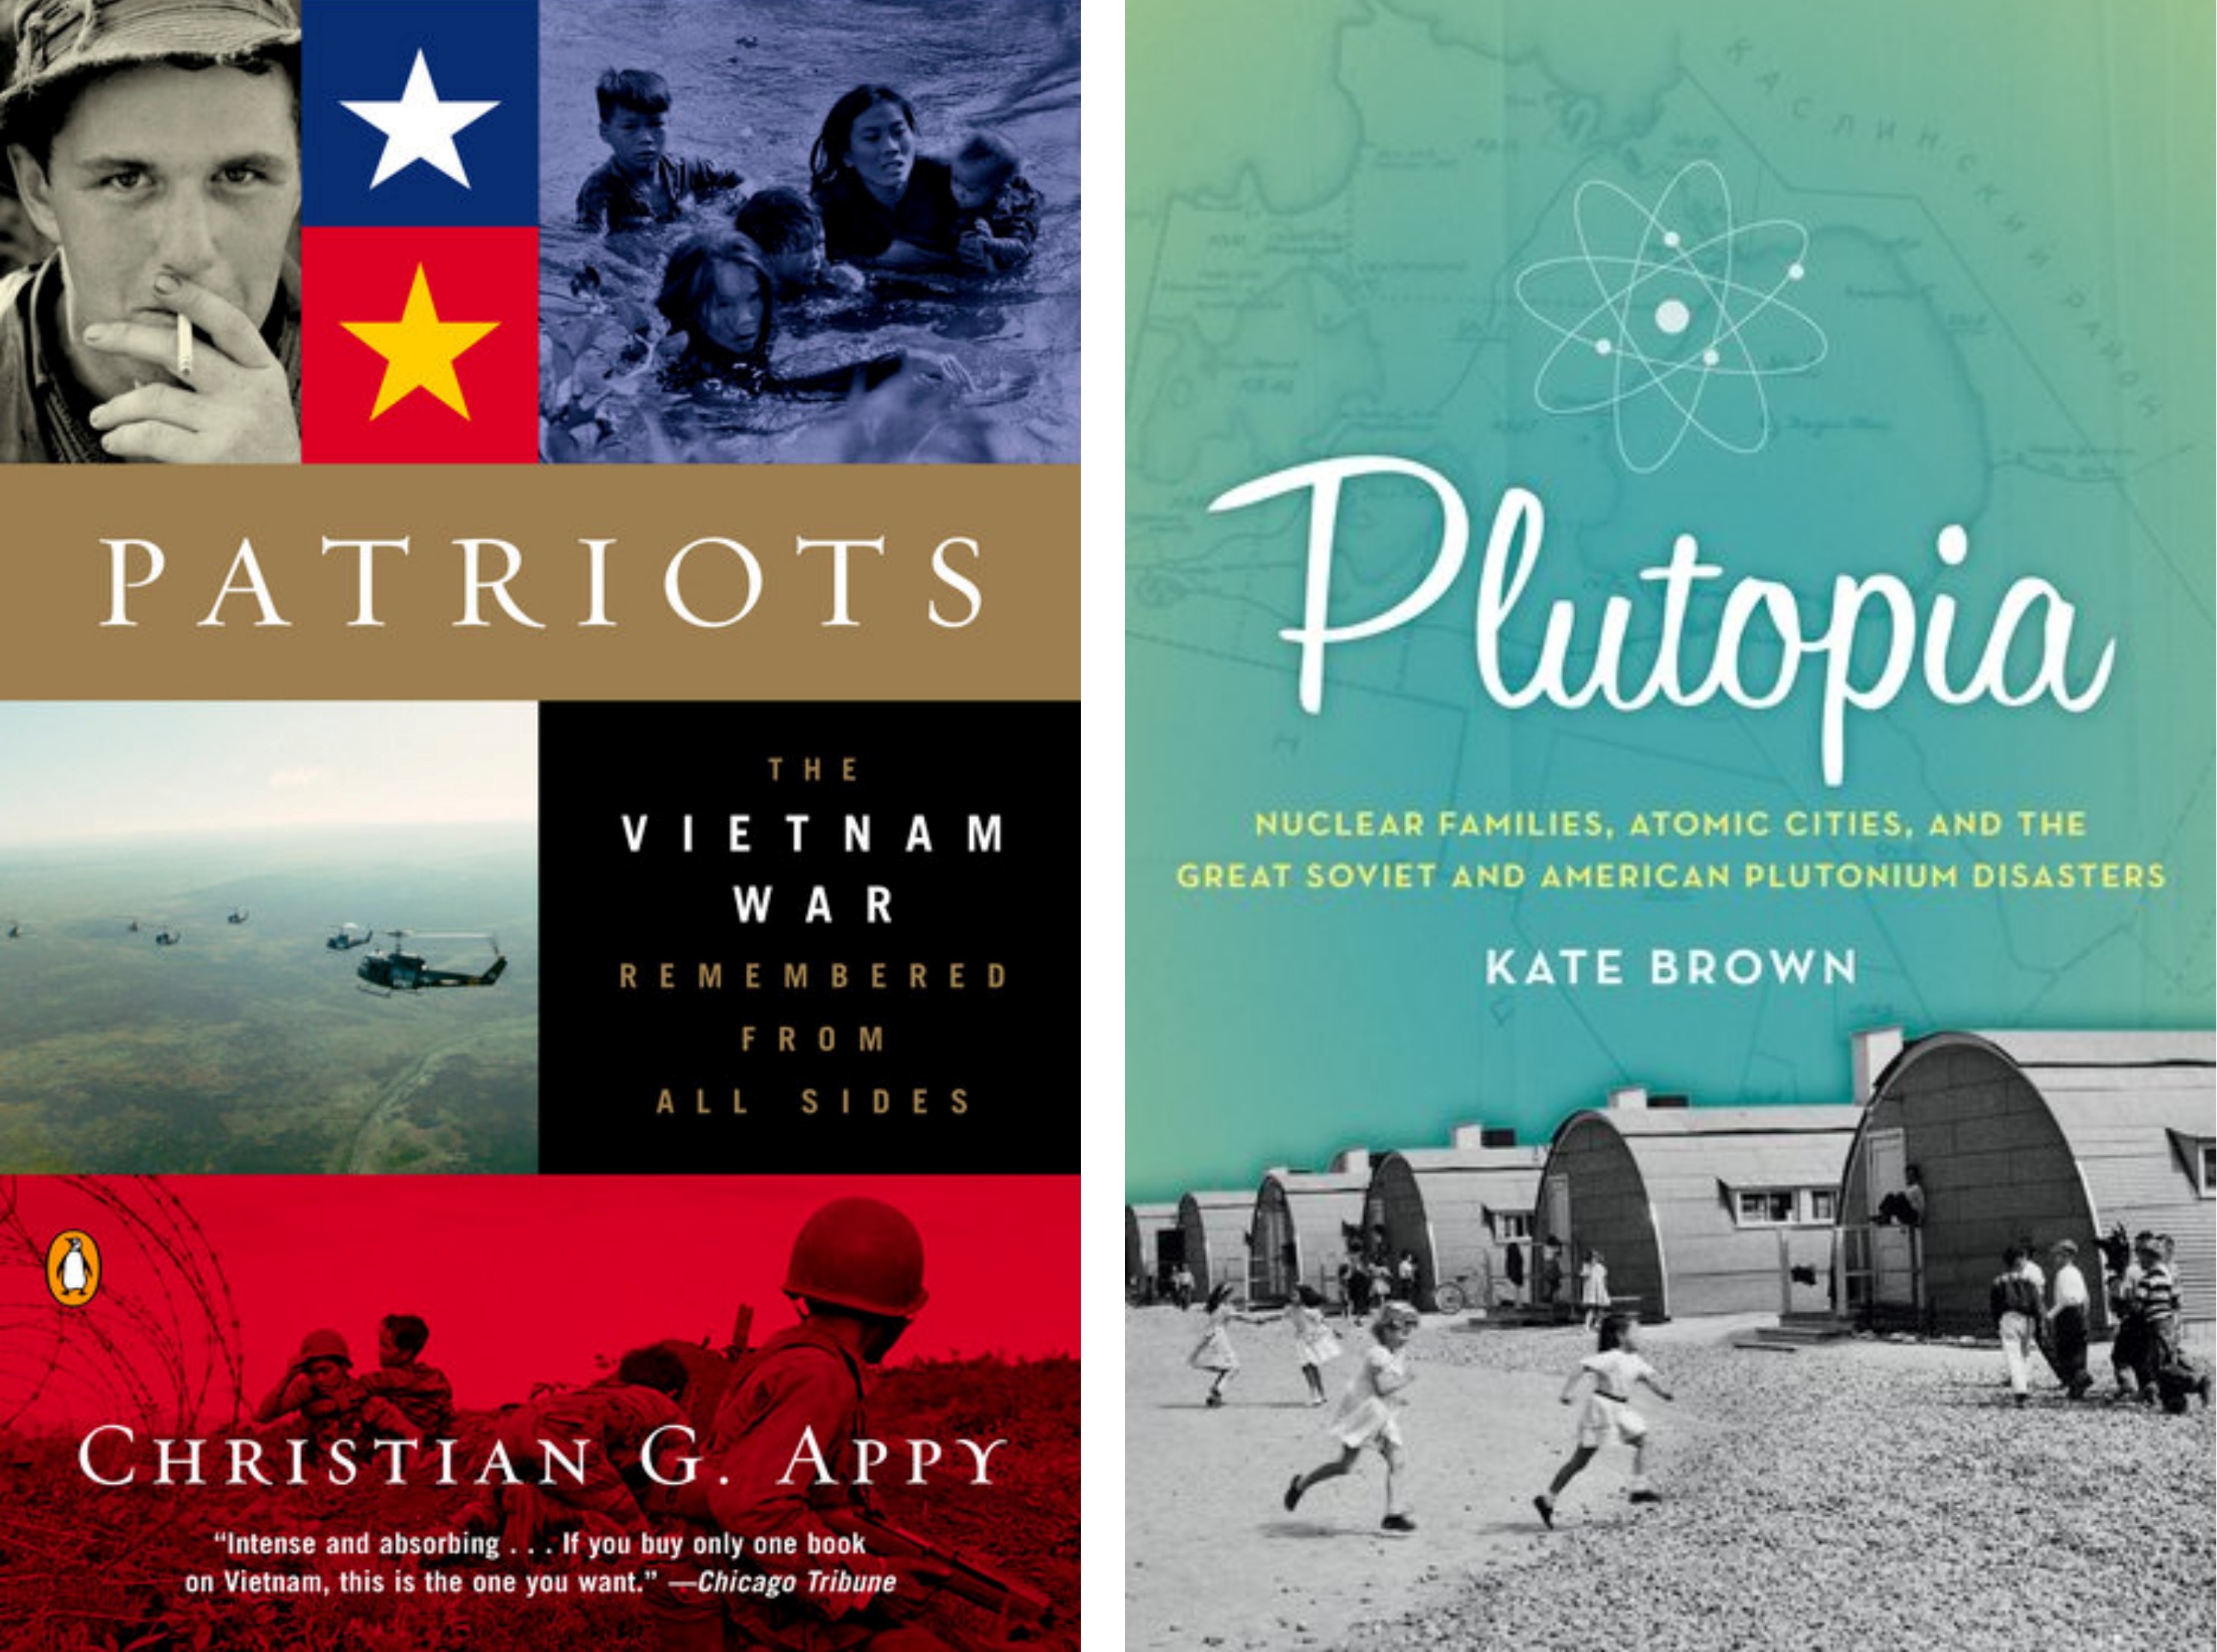 On the left, the cover of 'Patriots.' On the right, the cover of 'Plutopia."